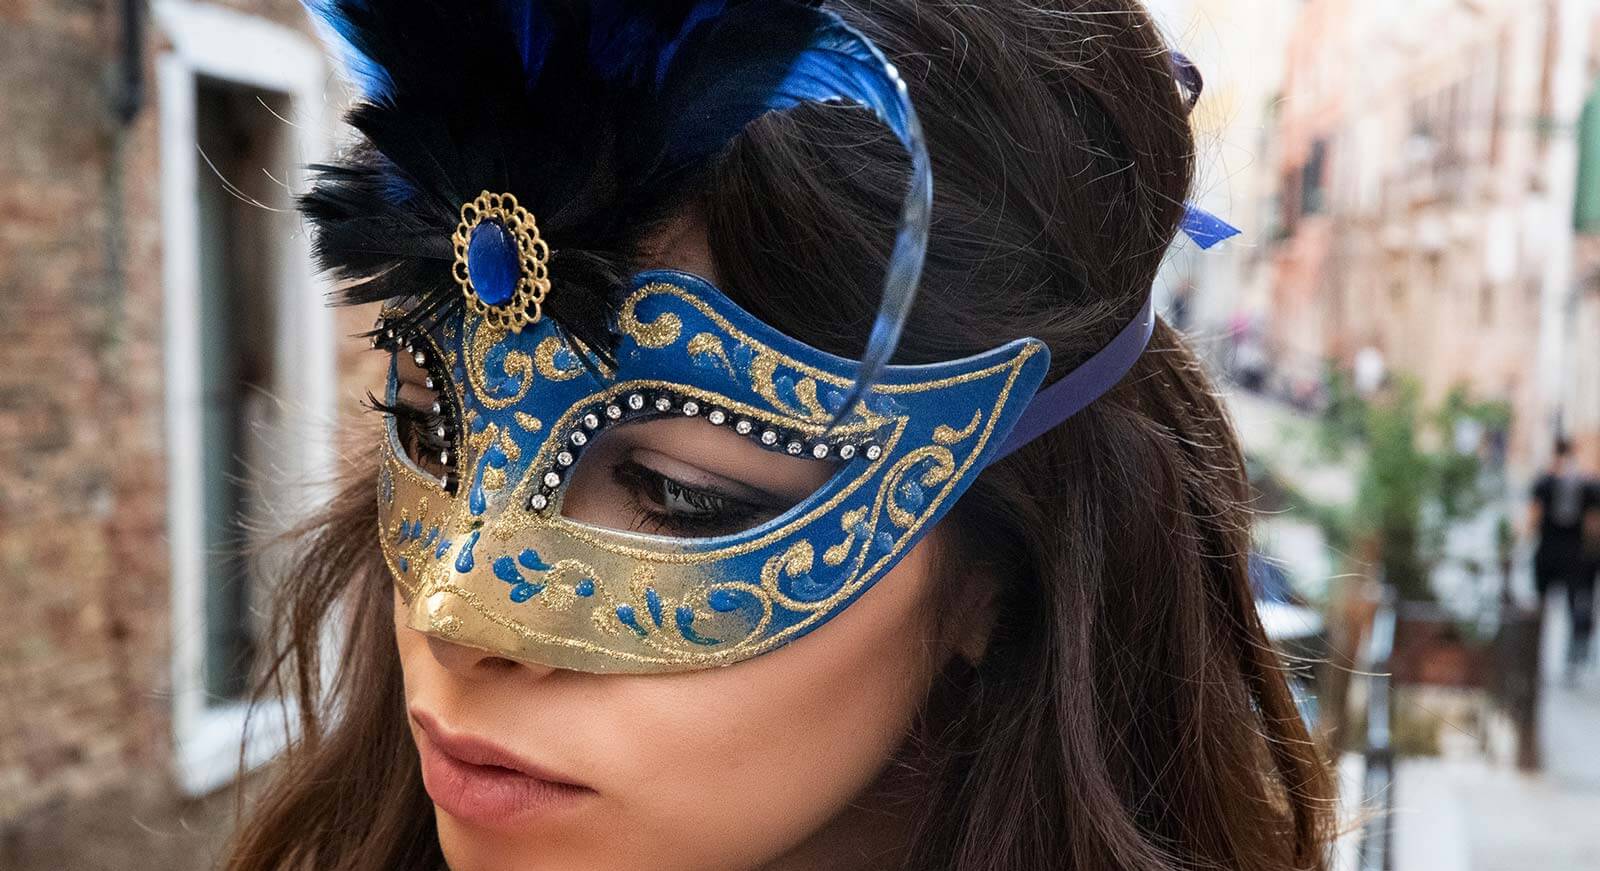 Venetian mask with feathers: show your elegance and beauty